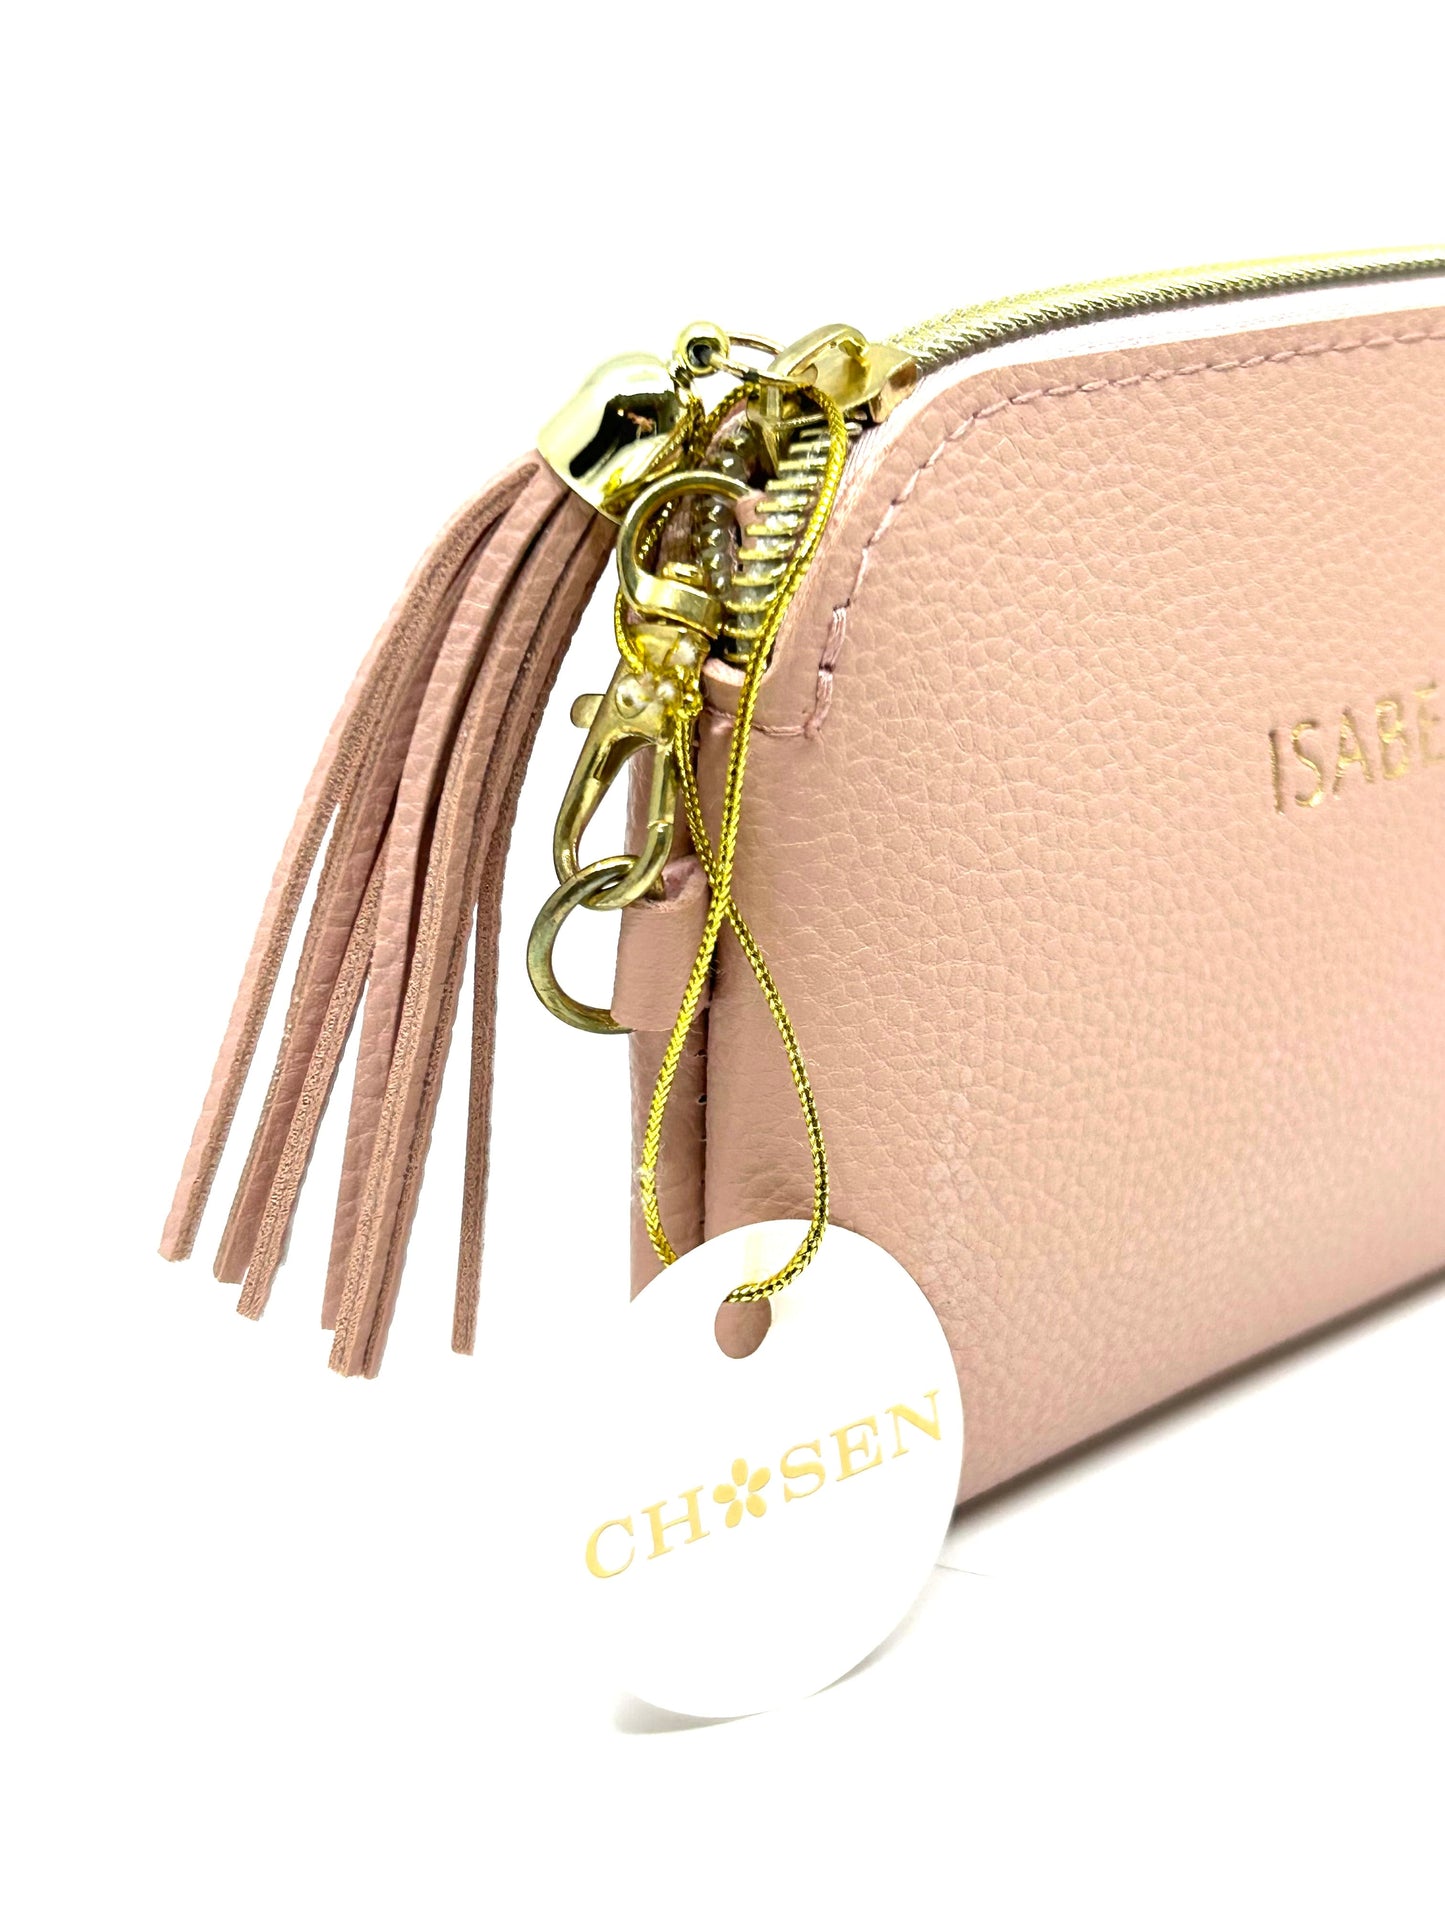 Chosen Personalized Name Brittany Wristlet Purse for Women